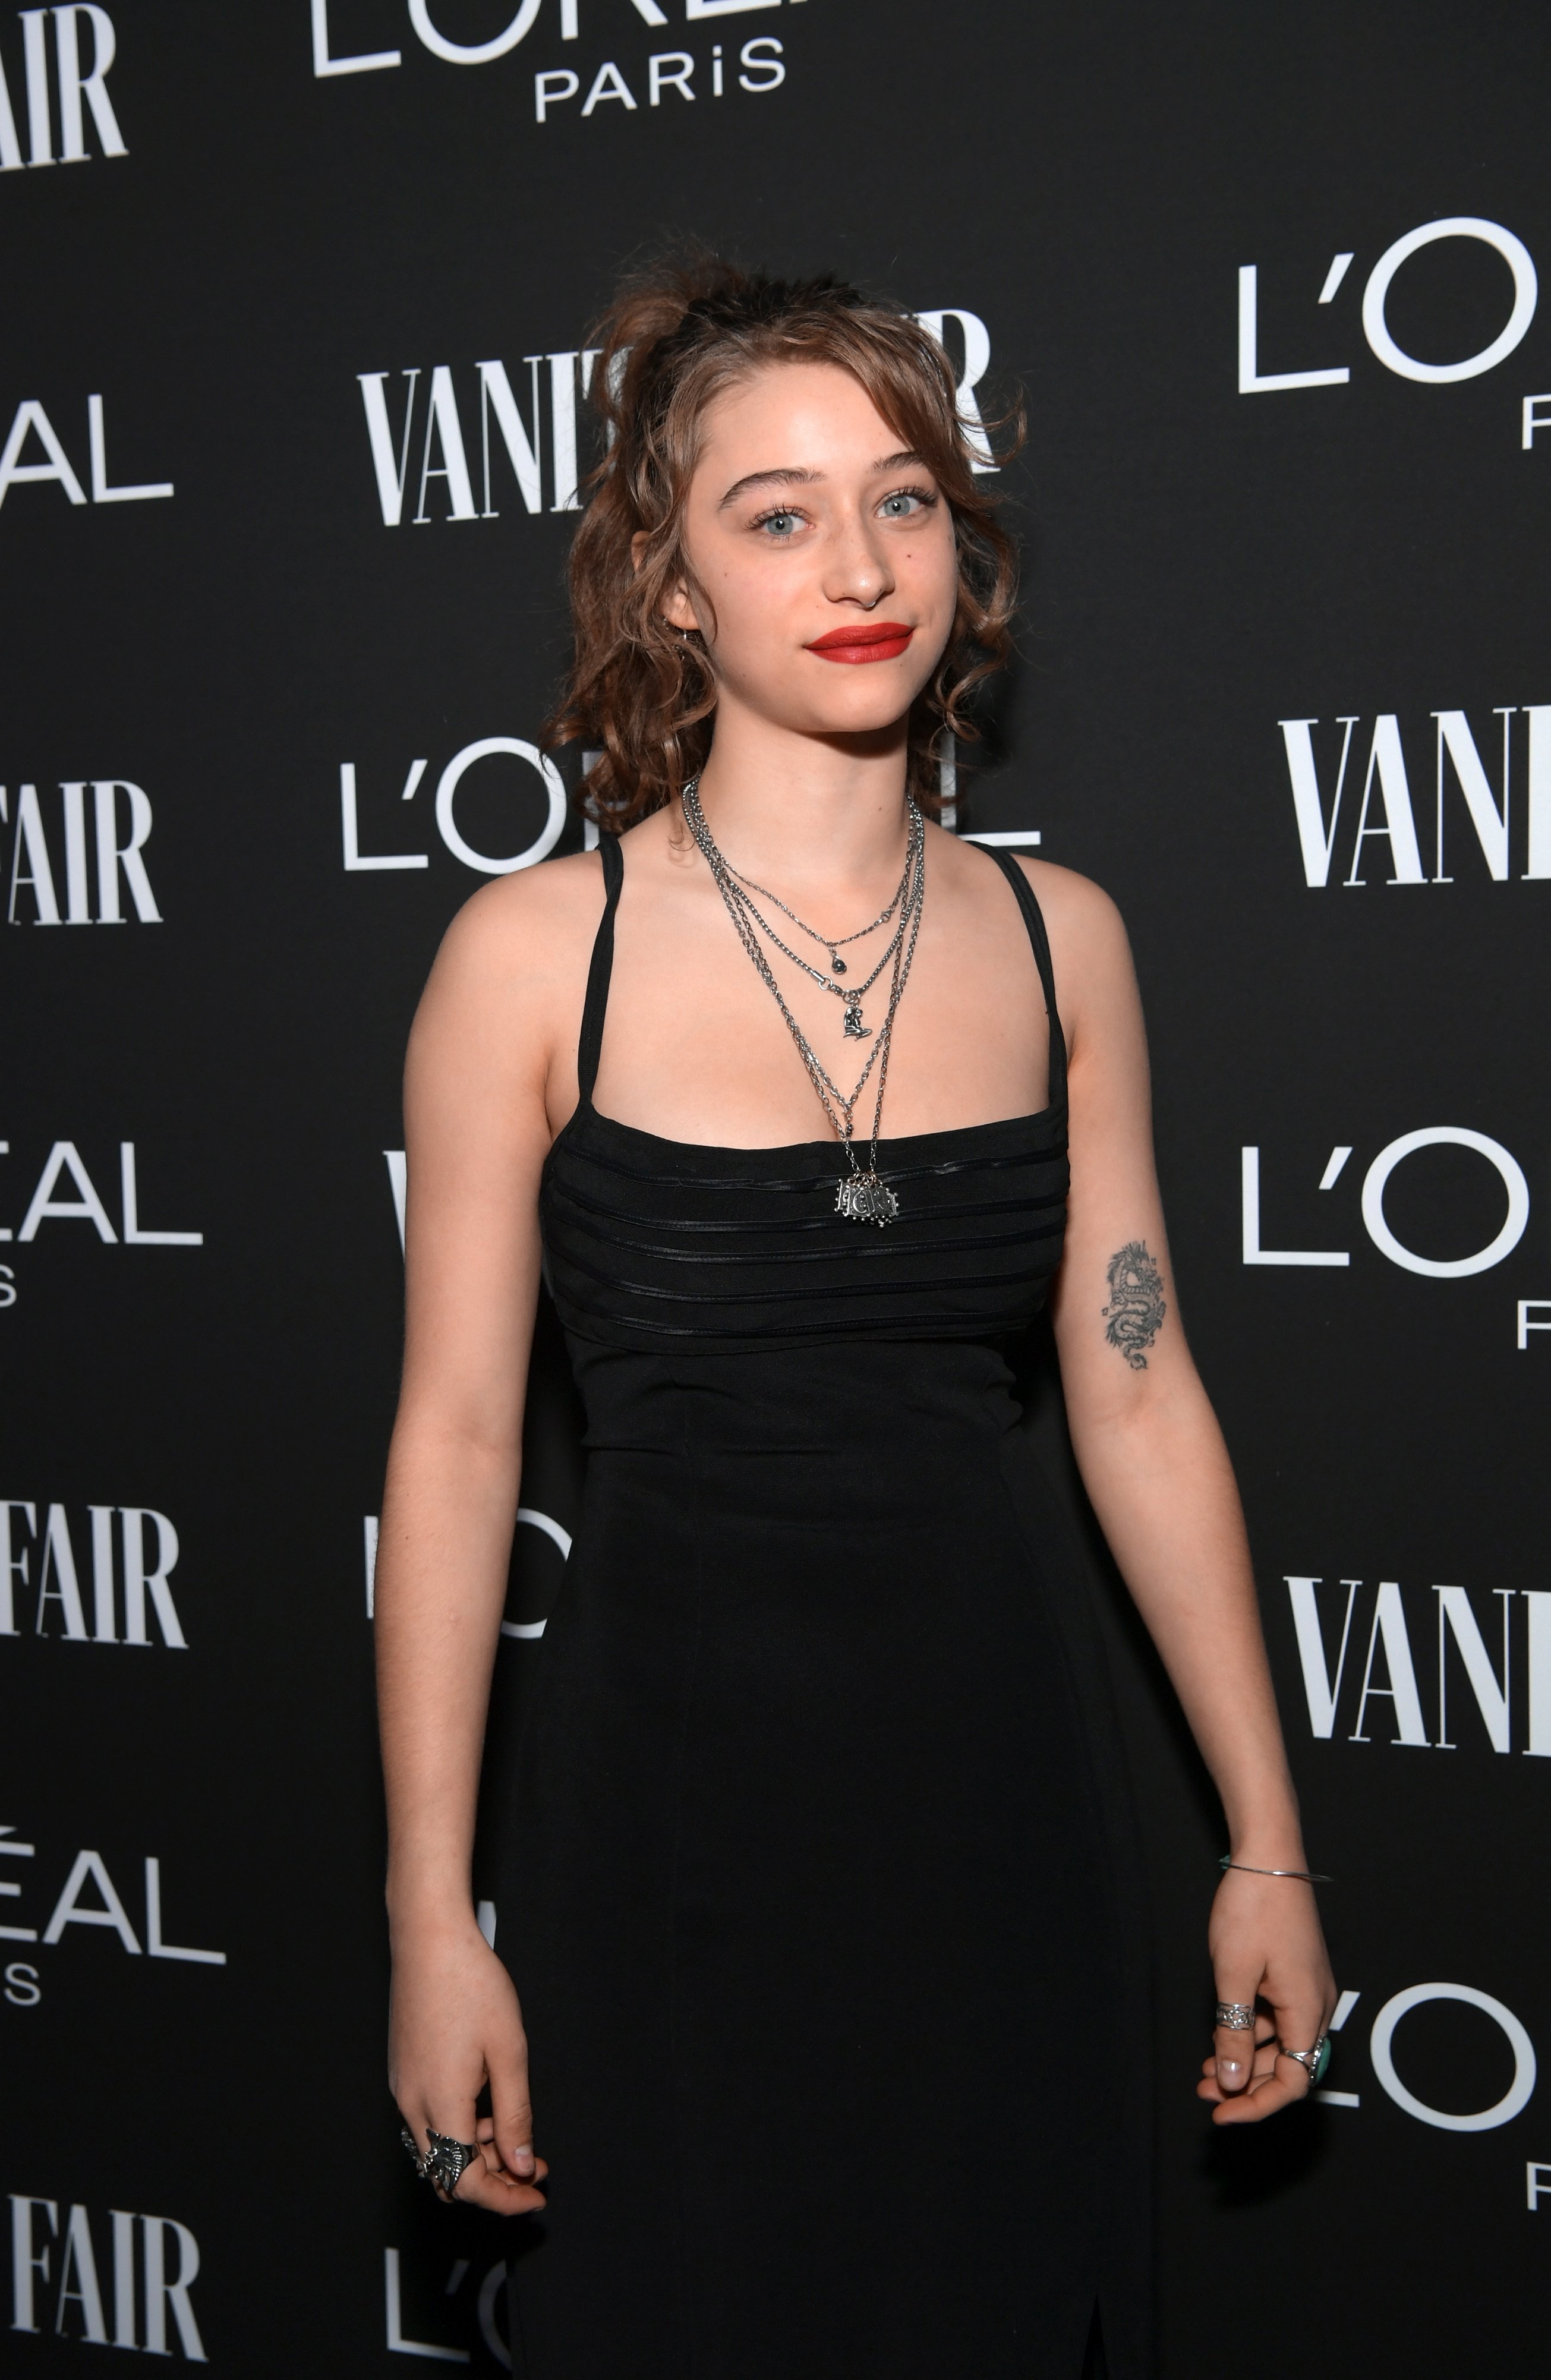 Odessa Adlon is seen as Vanity Fair and L'Oréal Paris Celebrate New Hollywood on February 19, 2019, in Los Angeles, California. | Source: Getty Images